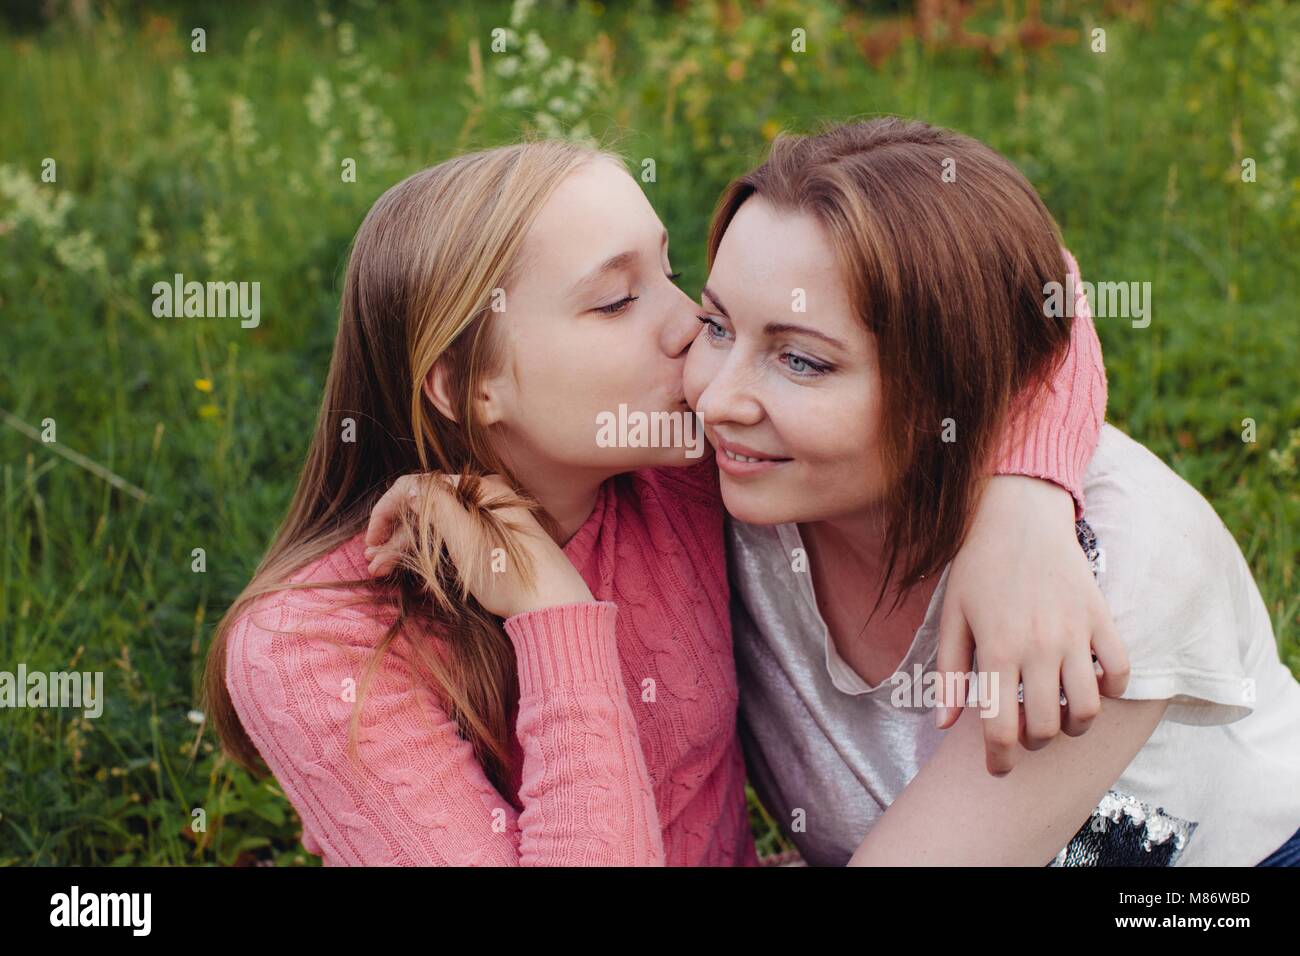 Daughter hugging and kissing her mother Stock Photo